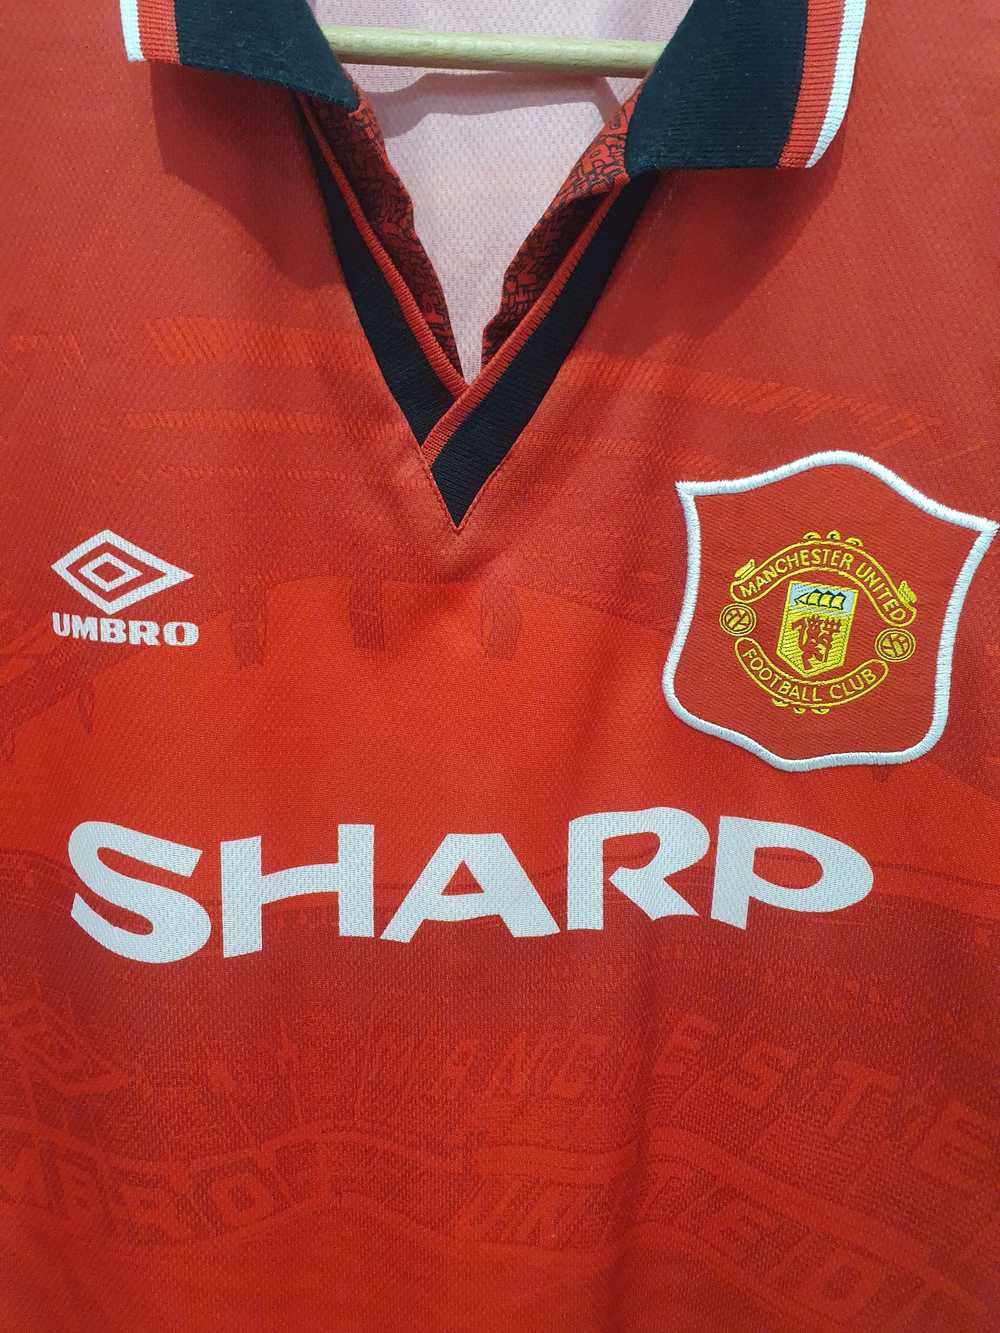 Jersey × Manchester United × Soccer Jersey MANCHE… - image 4